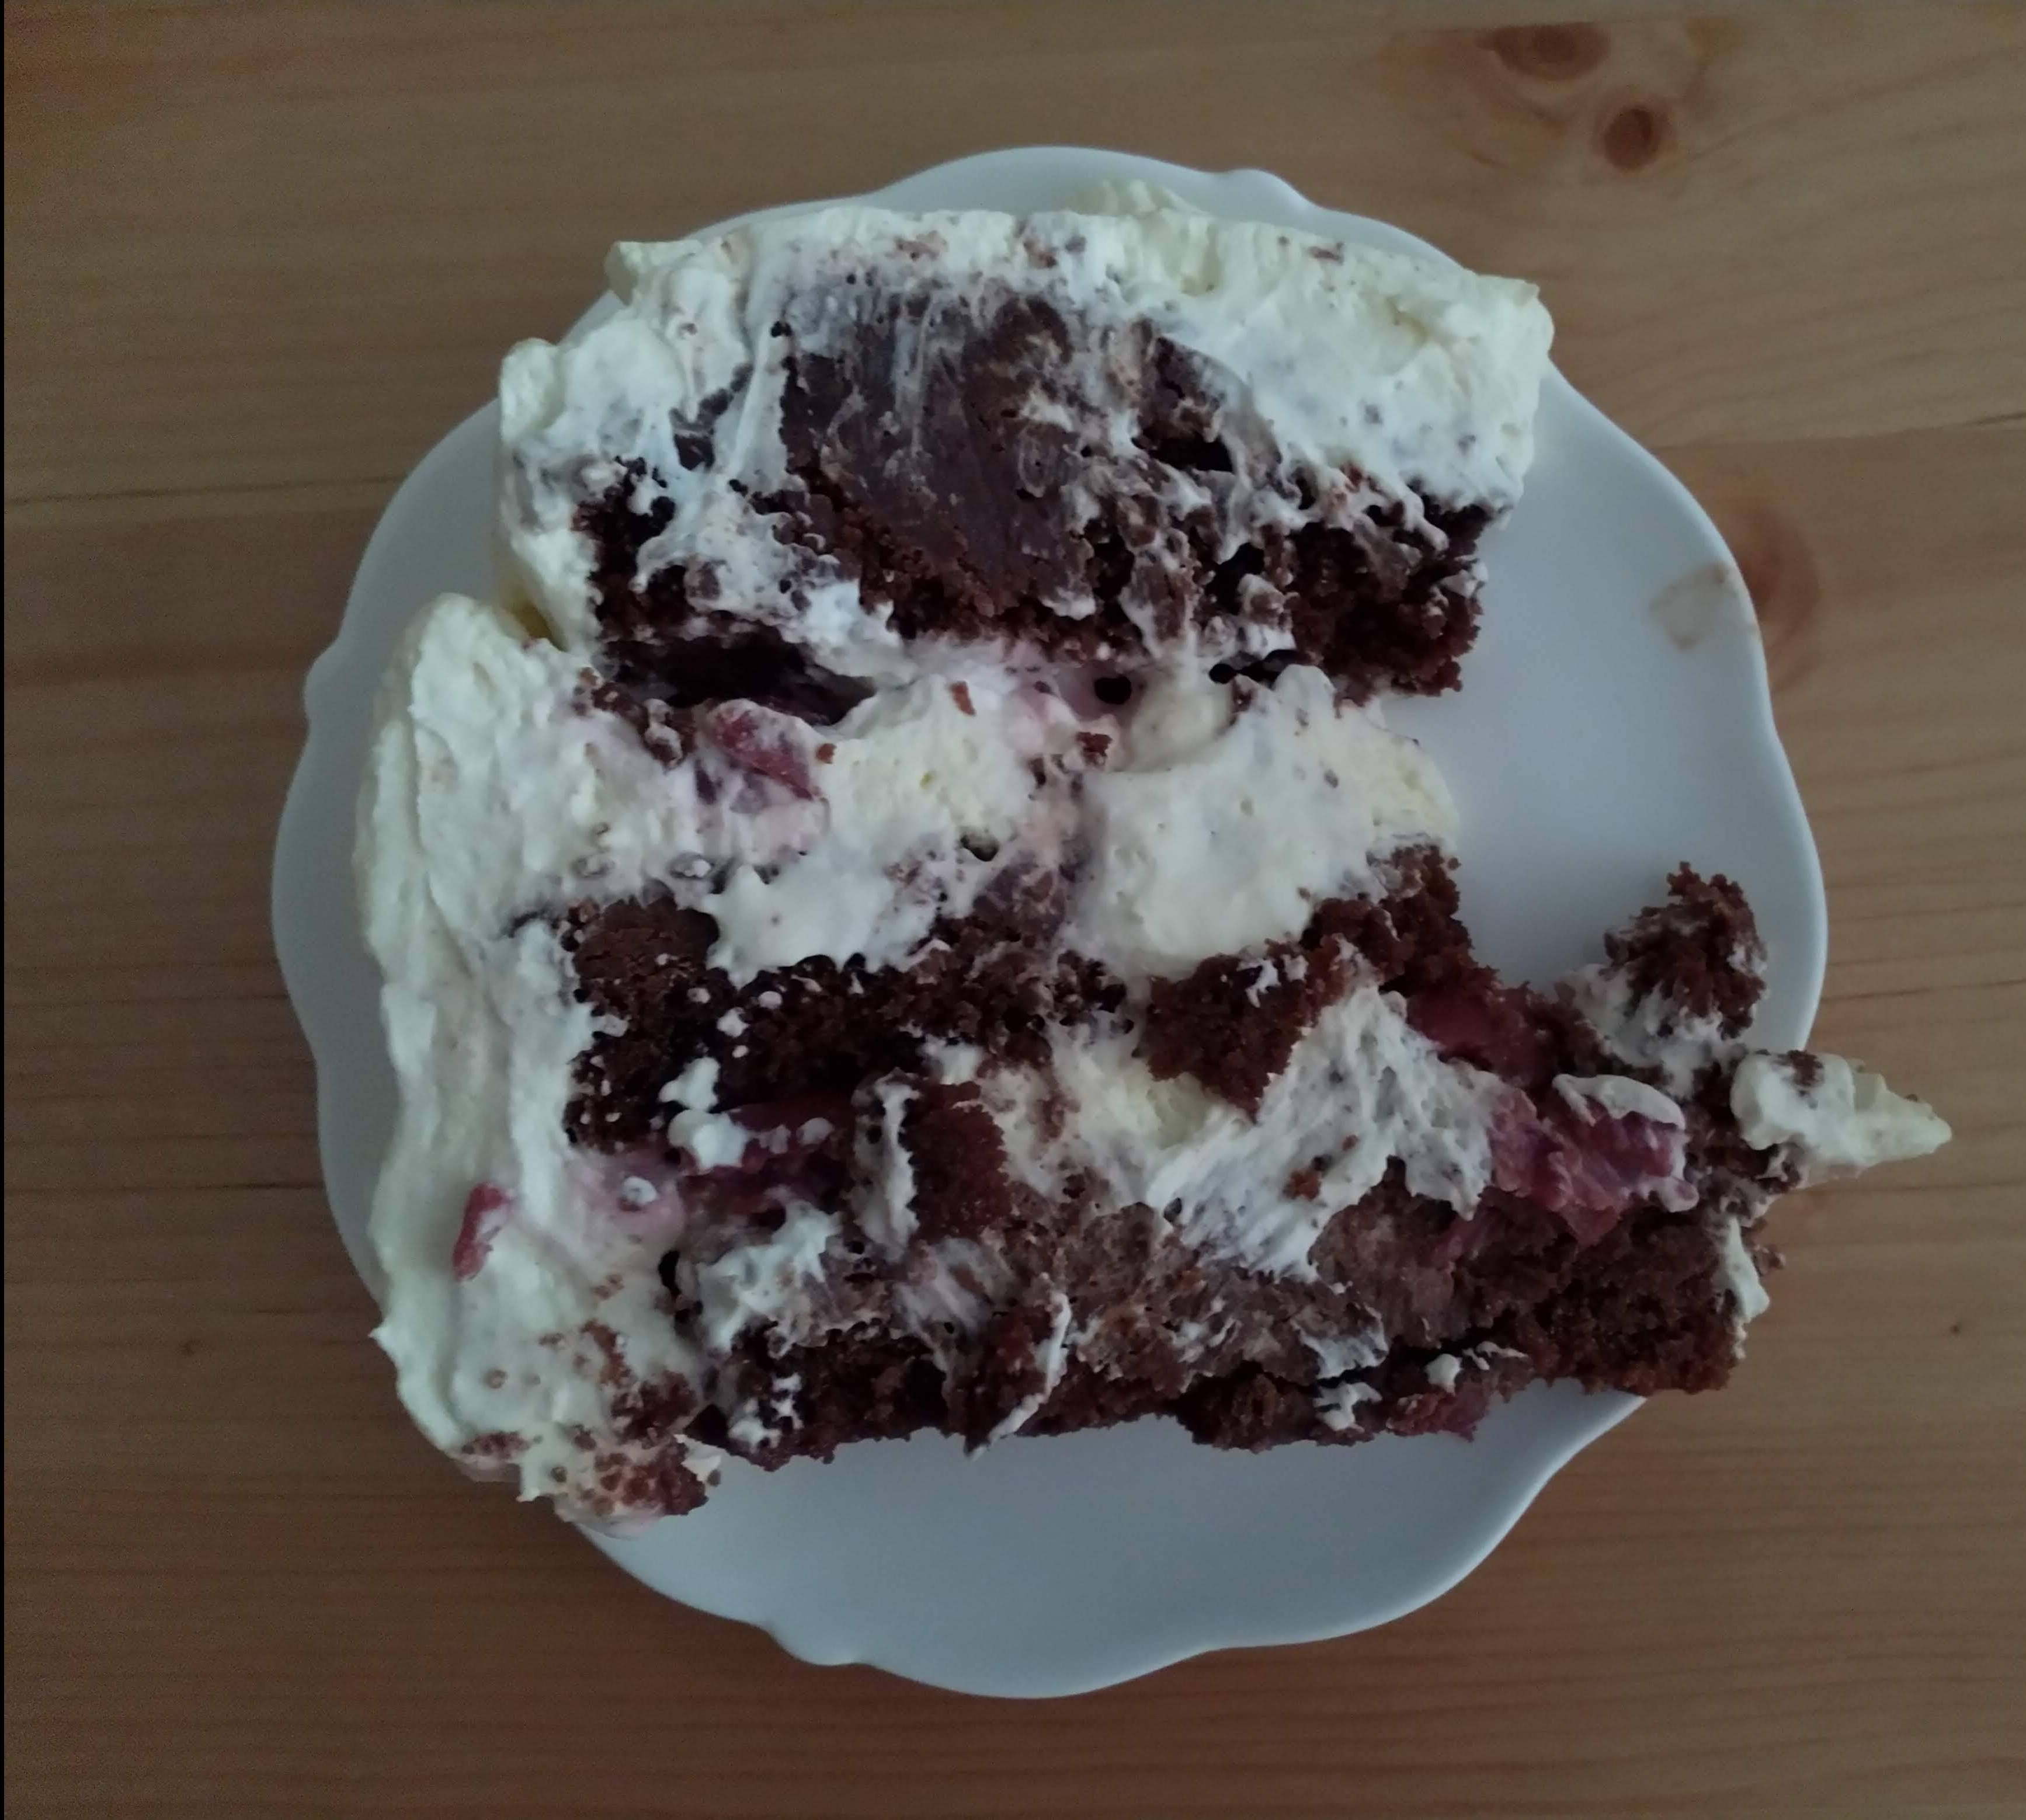 A slice of Black Forest Cake, only slightly nibbled!